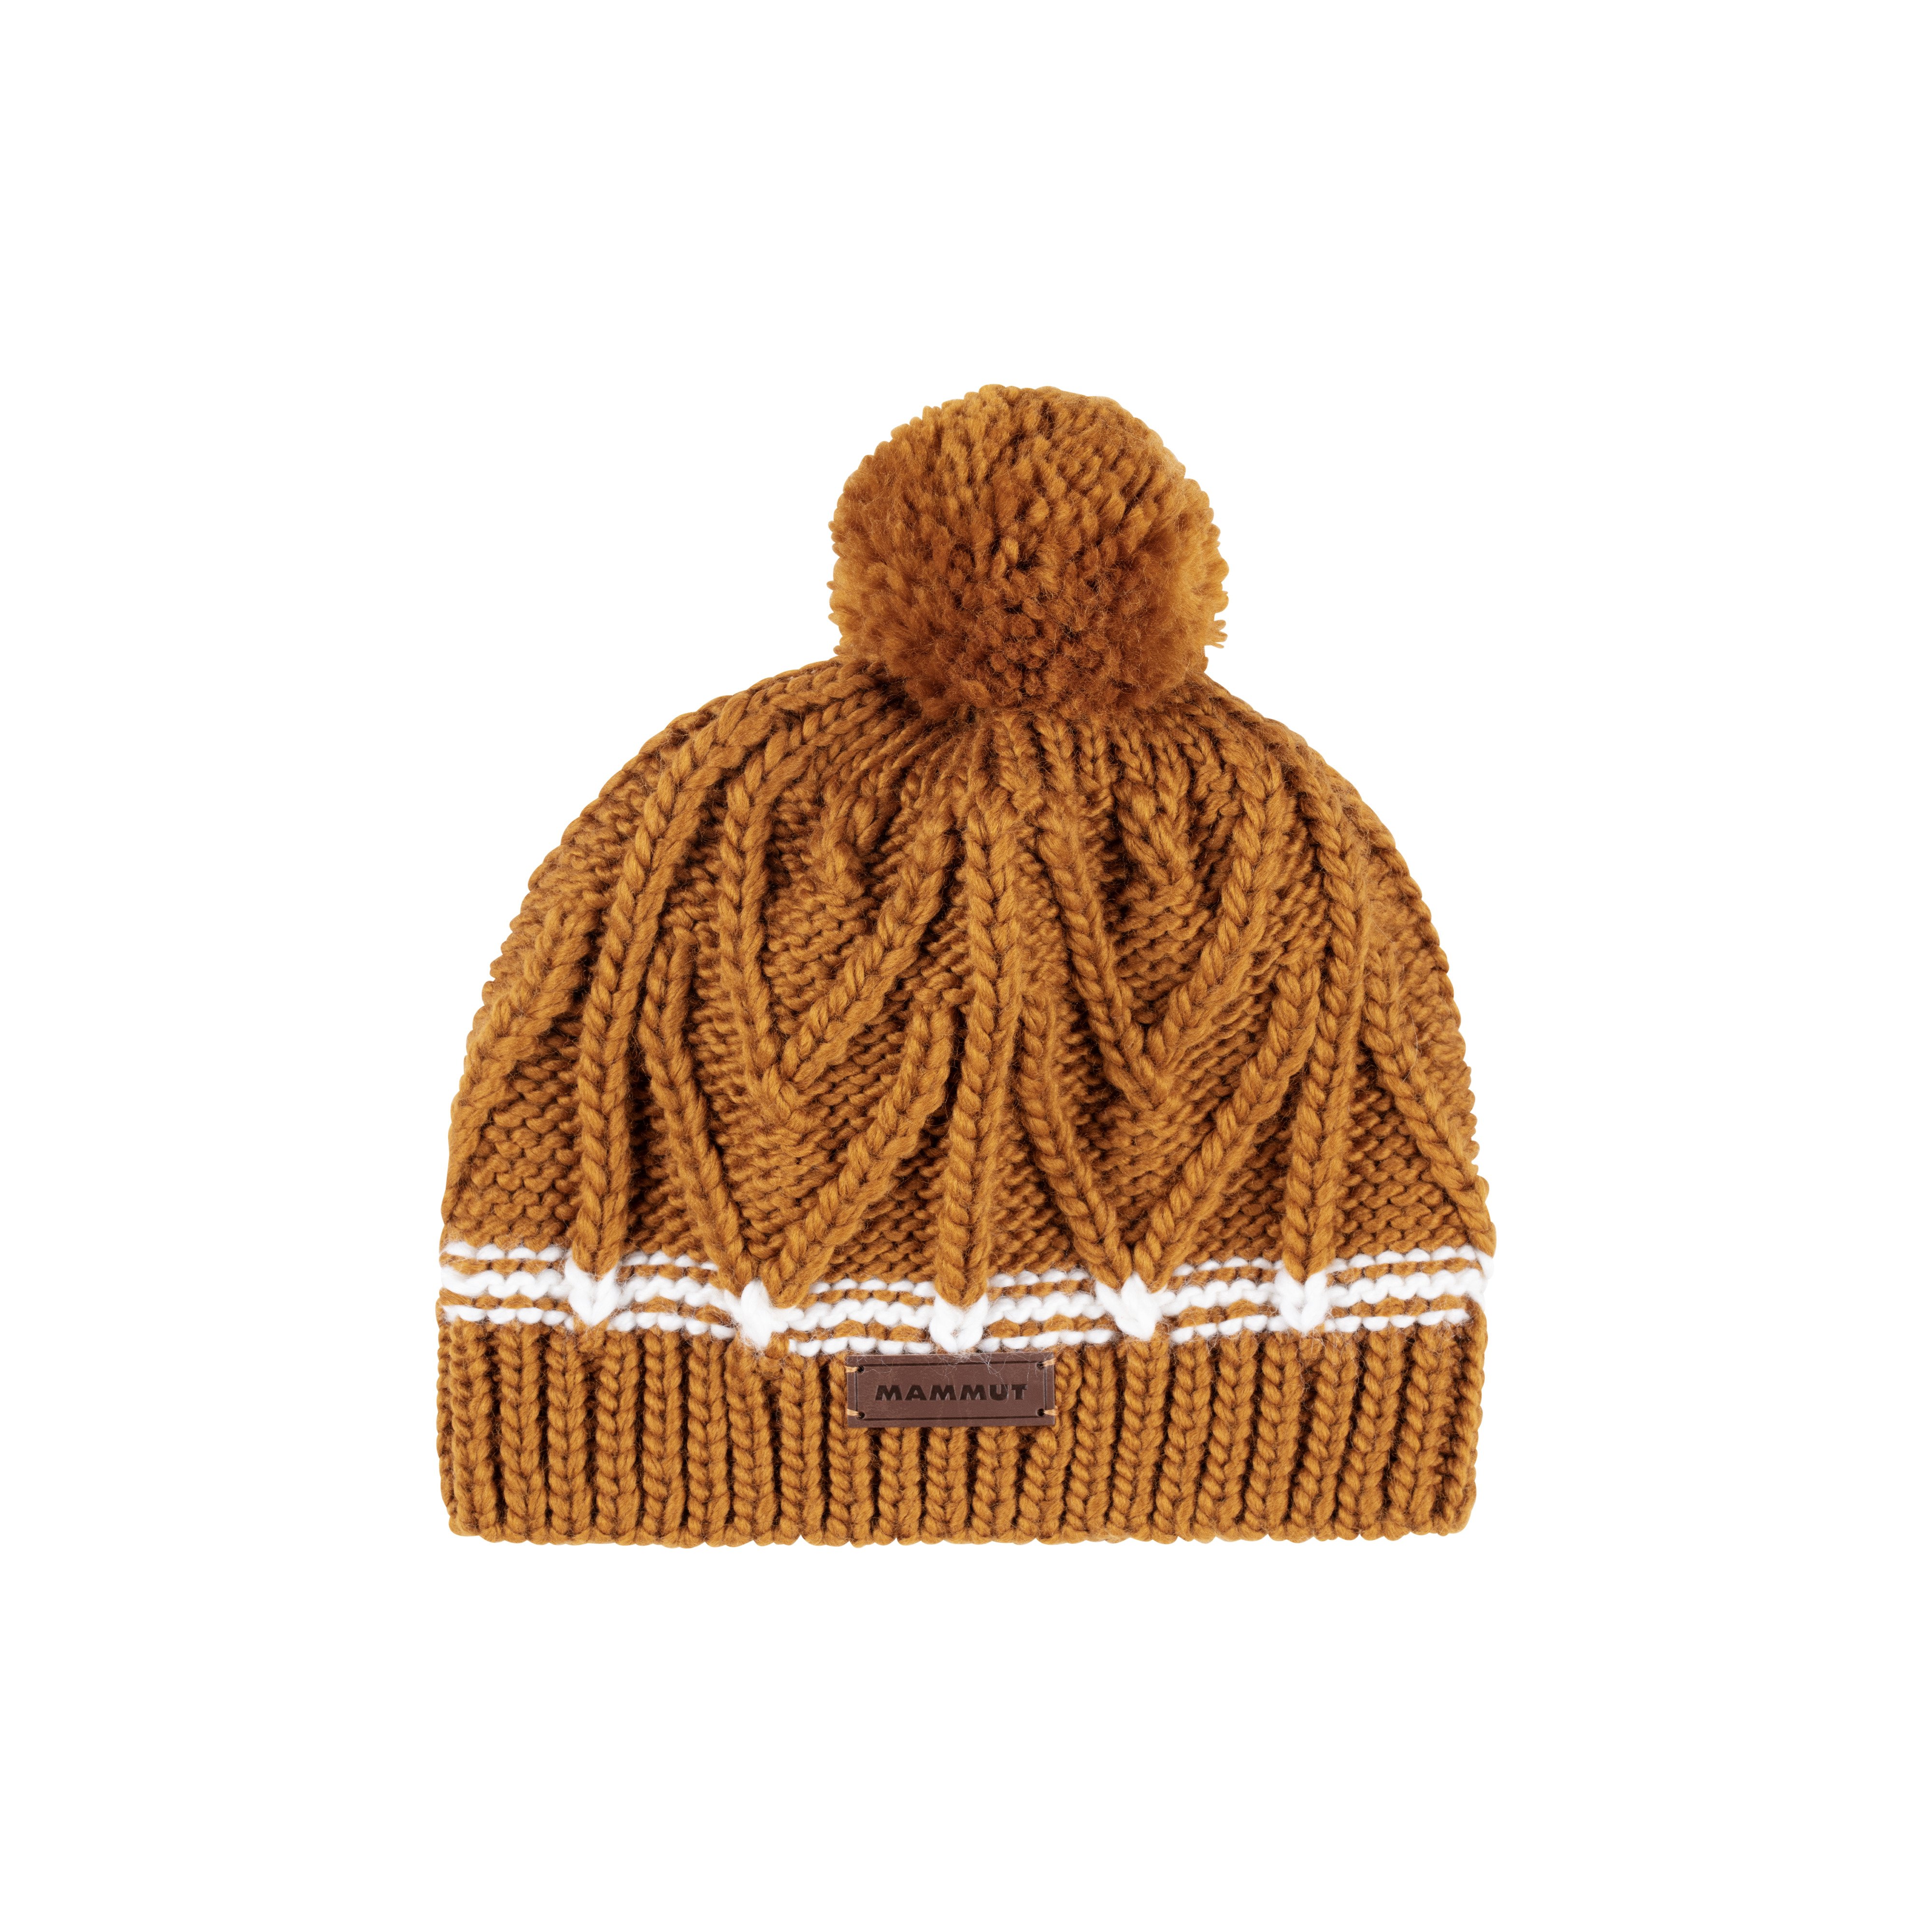 Sally Beanie - cheetah, one size product image